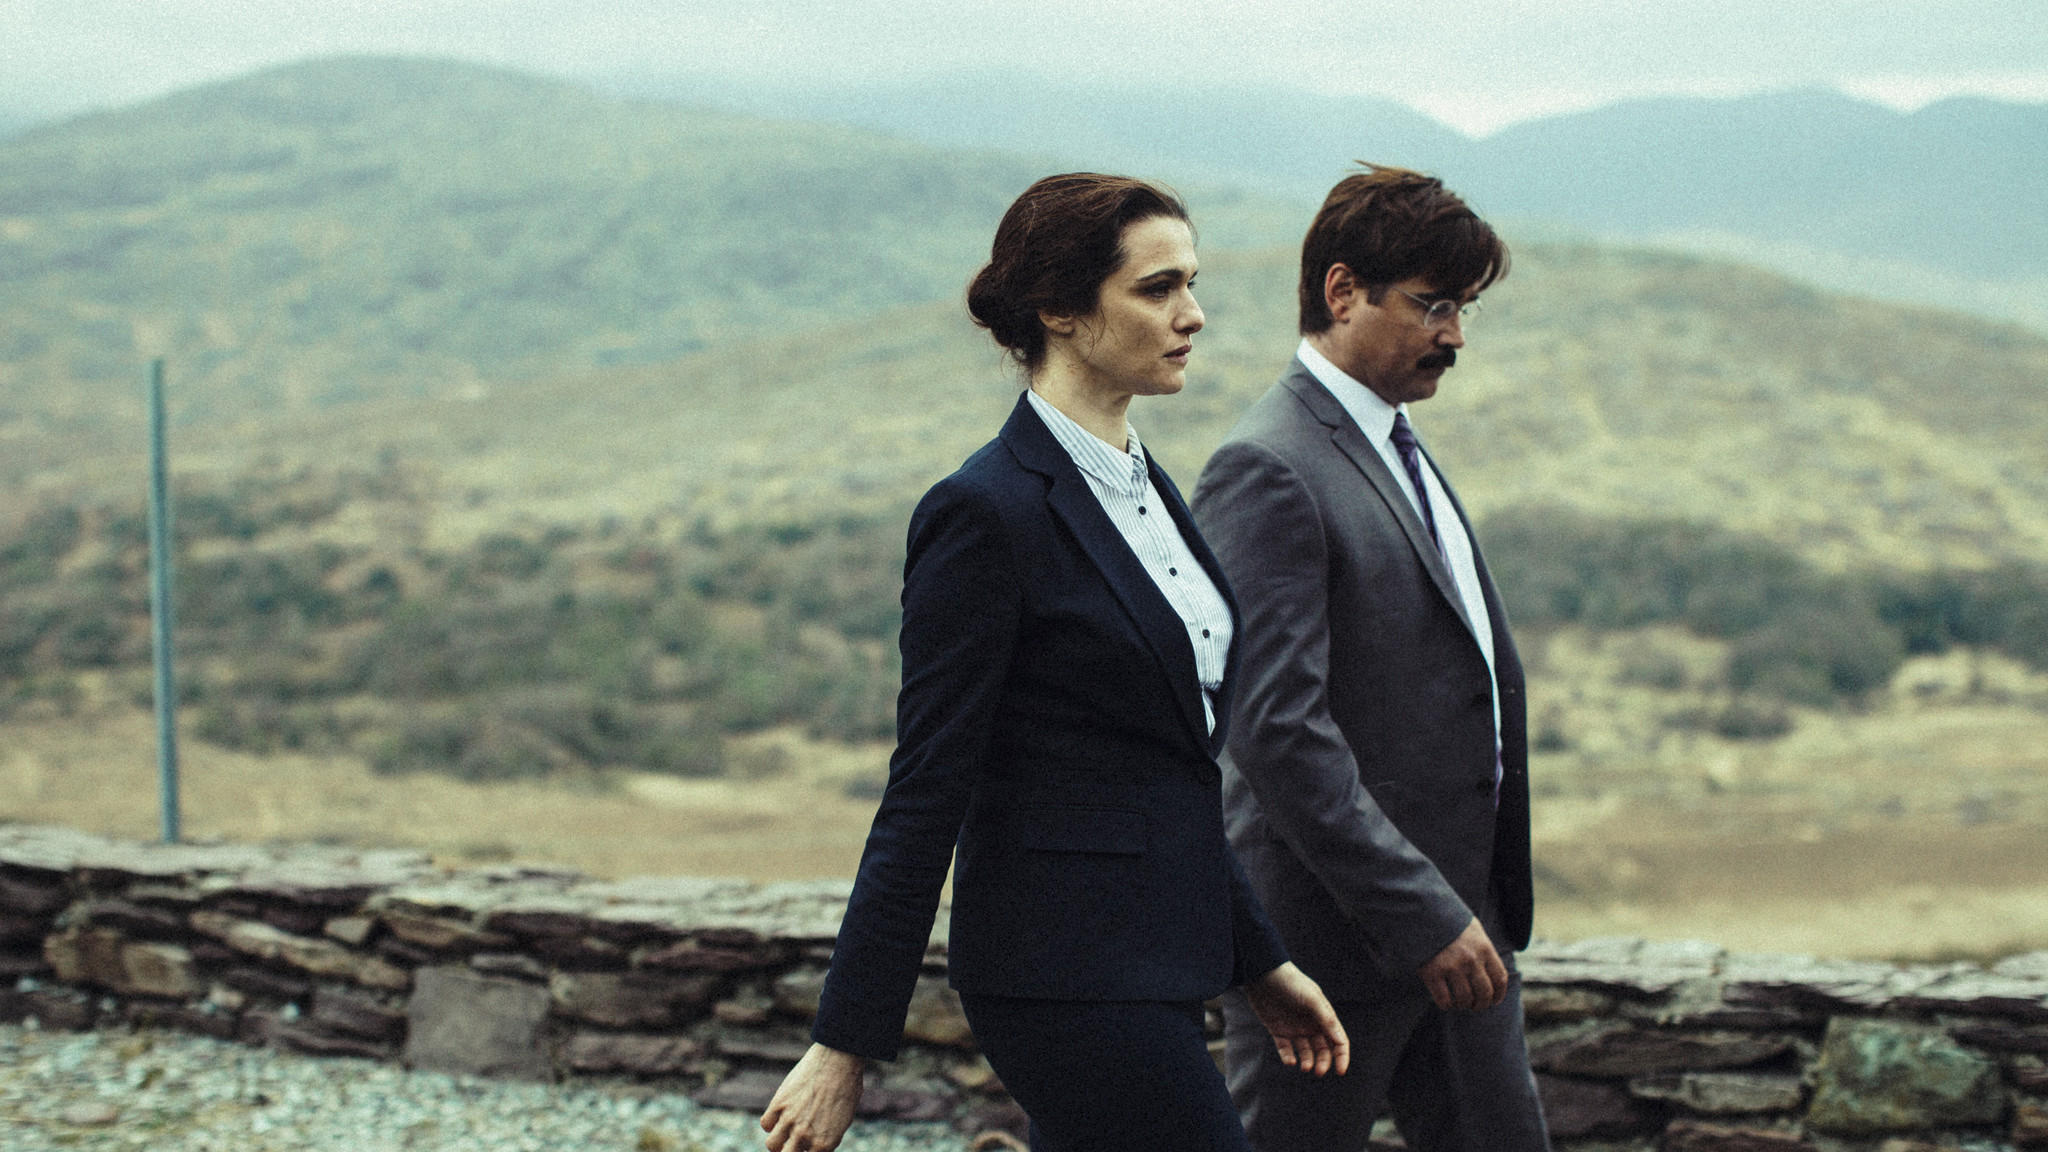 la et mn 0513 the lobster review colin farrell 051316 20160509 snap 1